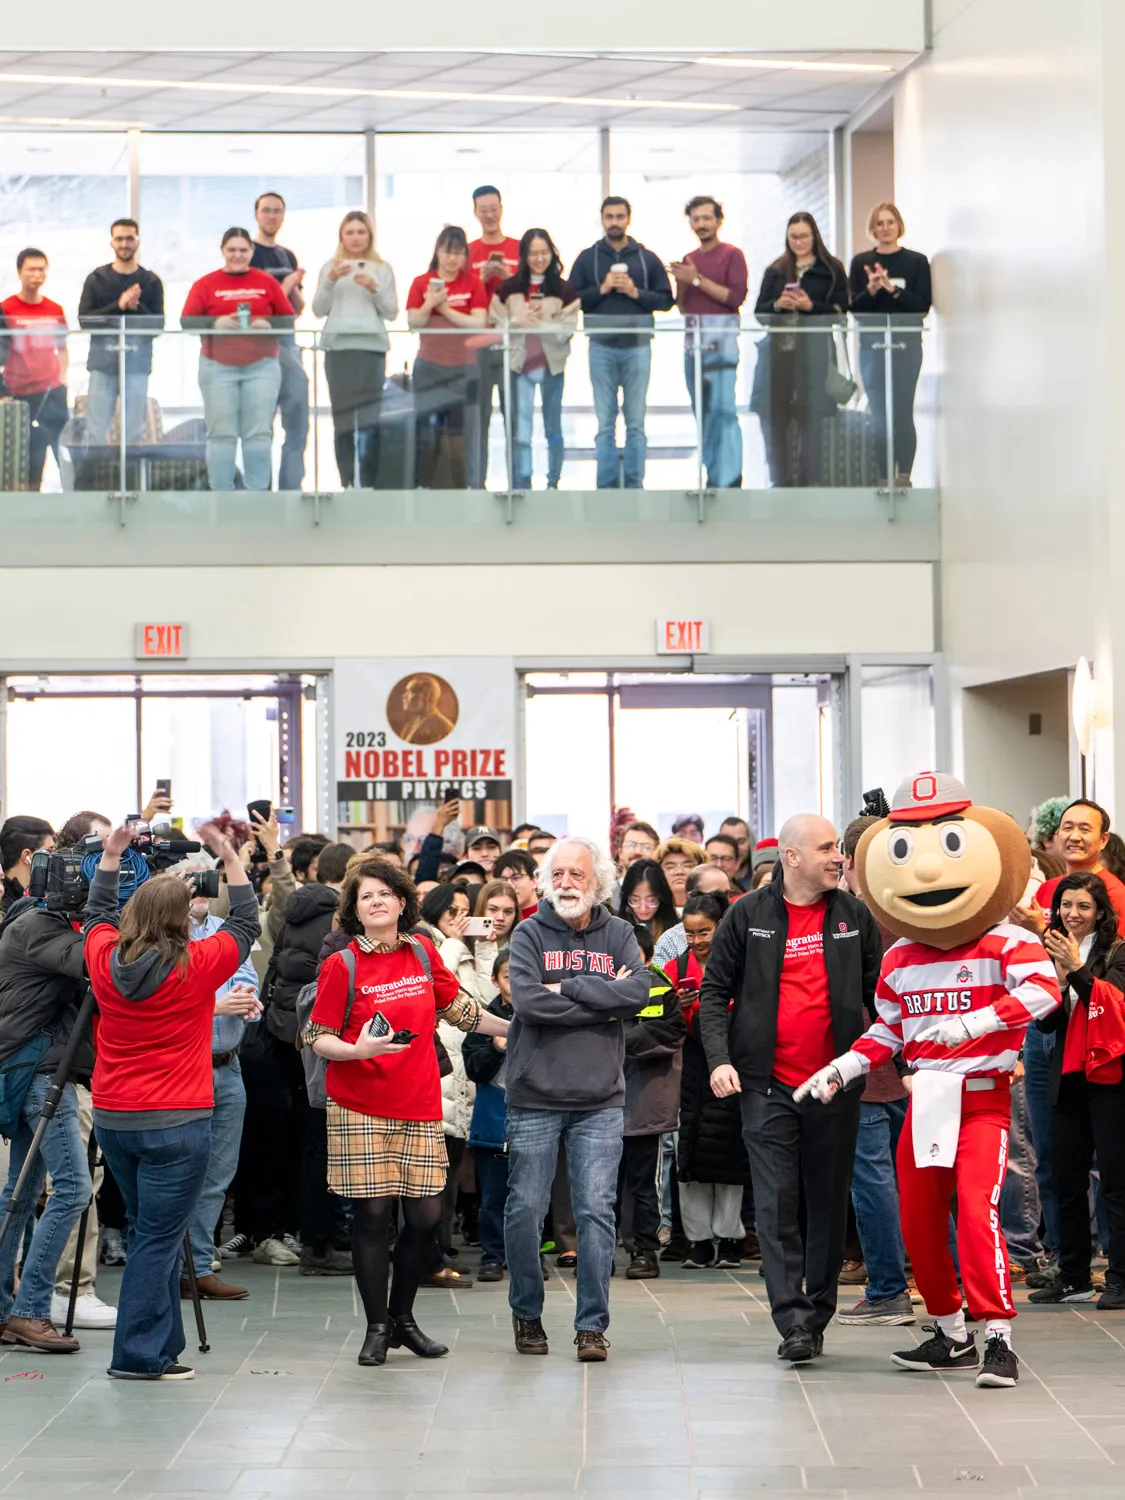 In a vertical photo showing the main floor of the Physics Research building and a balcony looking down into the lobby, crowds gather on both floors to cheer and photograph Agostini, Physics Department Chair Michael Poirier and Brutus Buckeye, a person dressed in Ohio State colors and wearing a giant, smiling, buckeye nut-shaped head. 